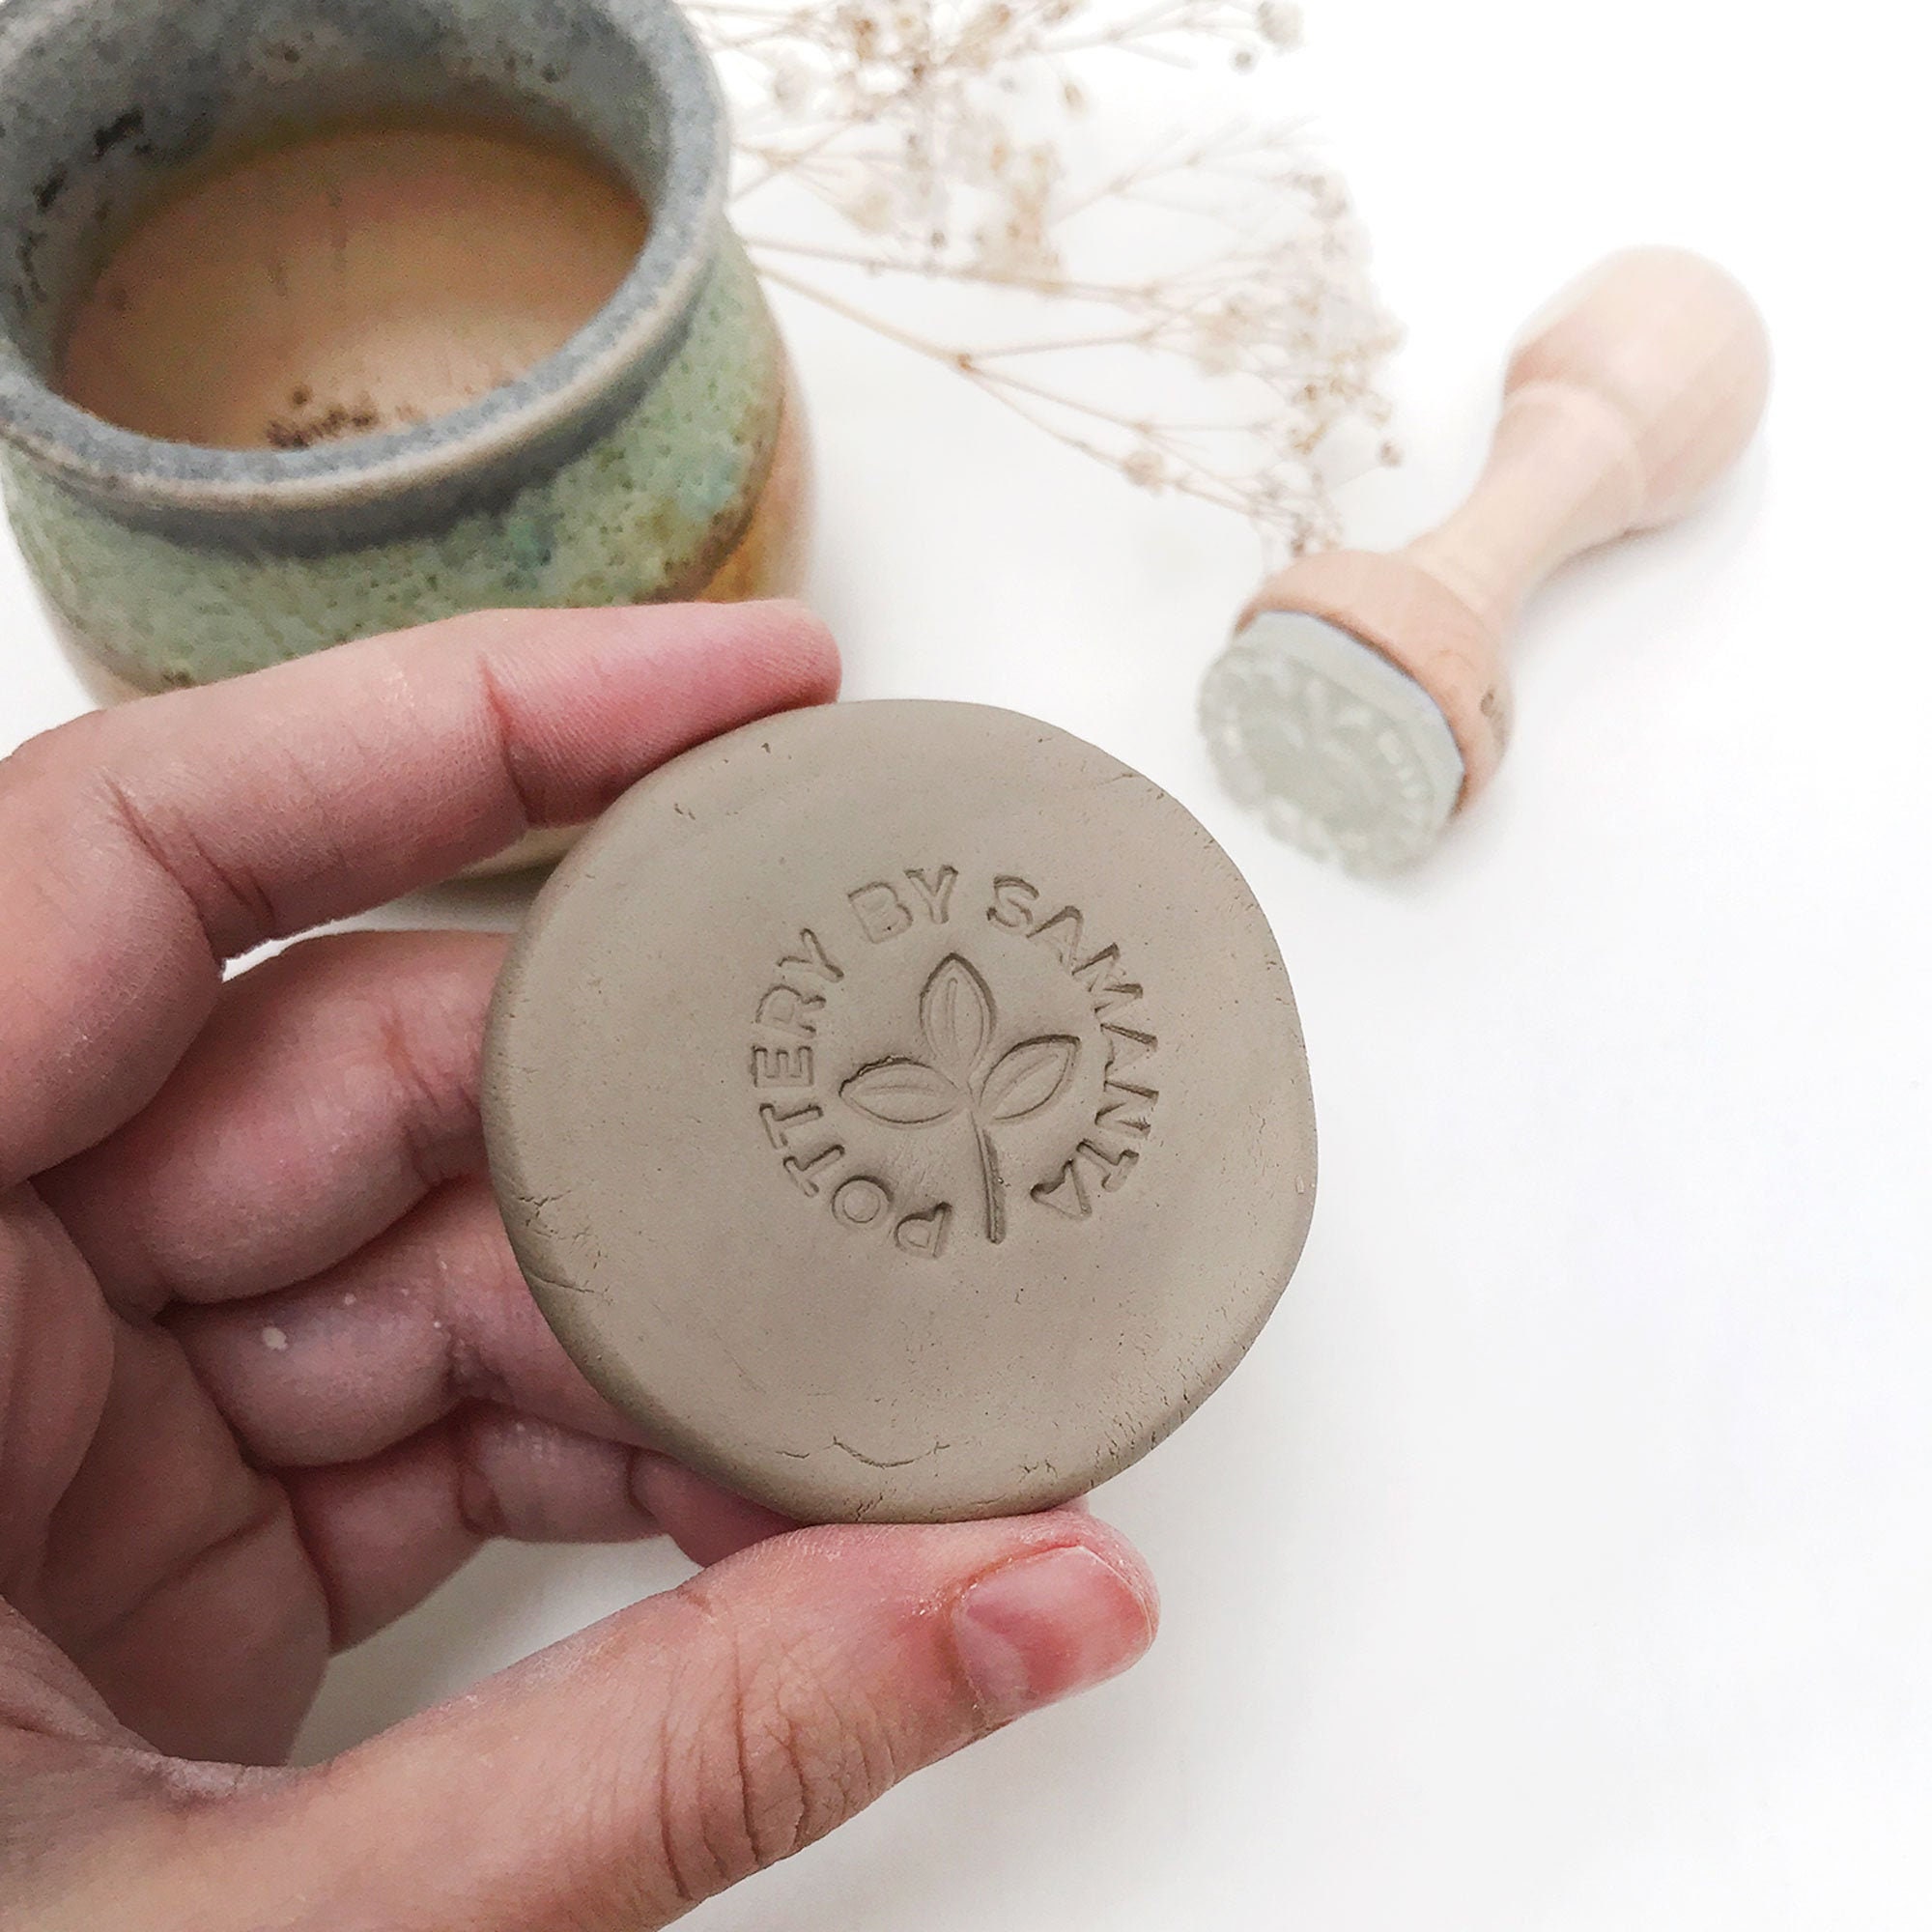  Handmade Clay Stamp, Clay Stamps for Pottery, Signature Pottery  Stamp, Ceramic Logo Stamp Custom, Pottery Stamp with Name, Soap Stamp :  Arts, Crafts & Sewing